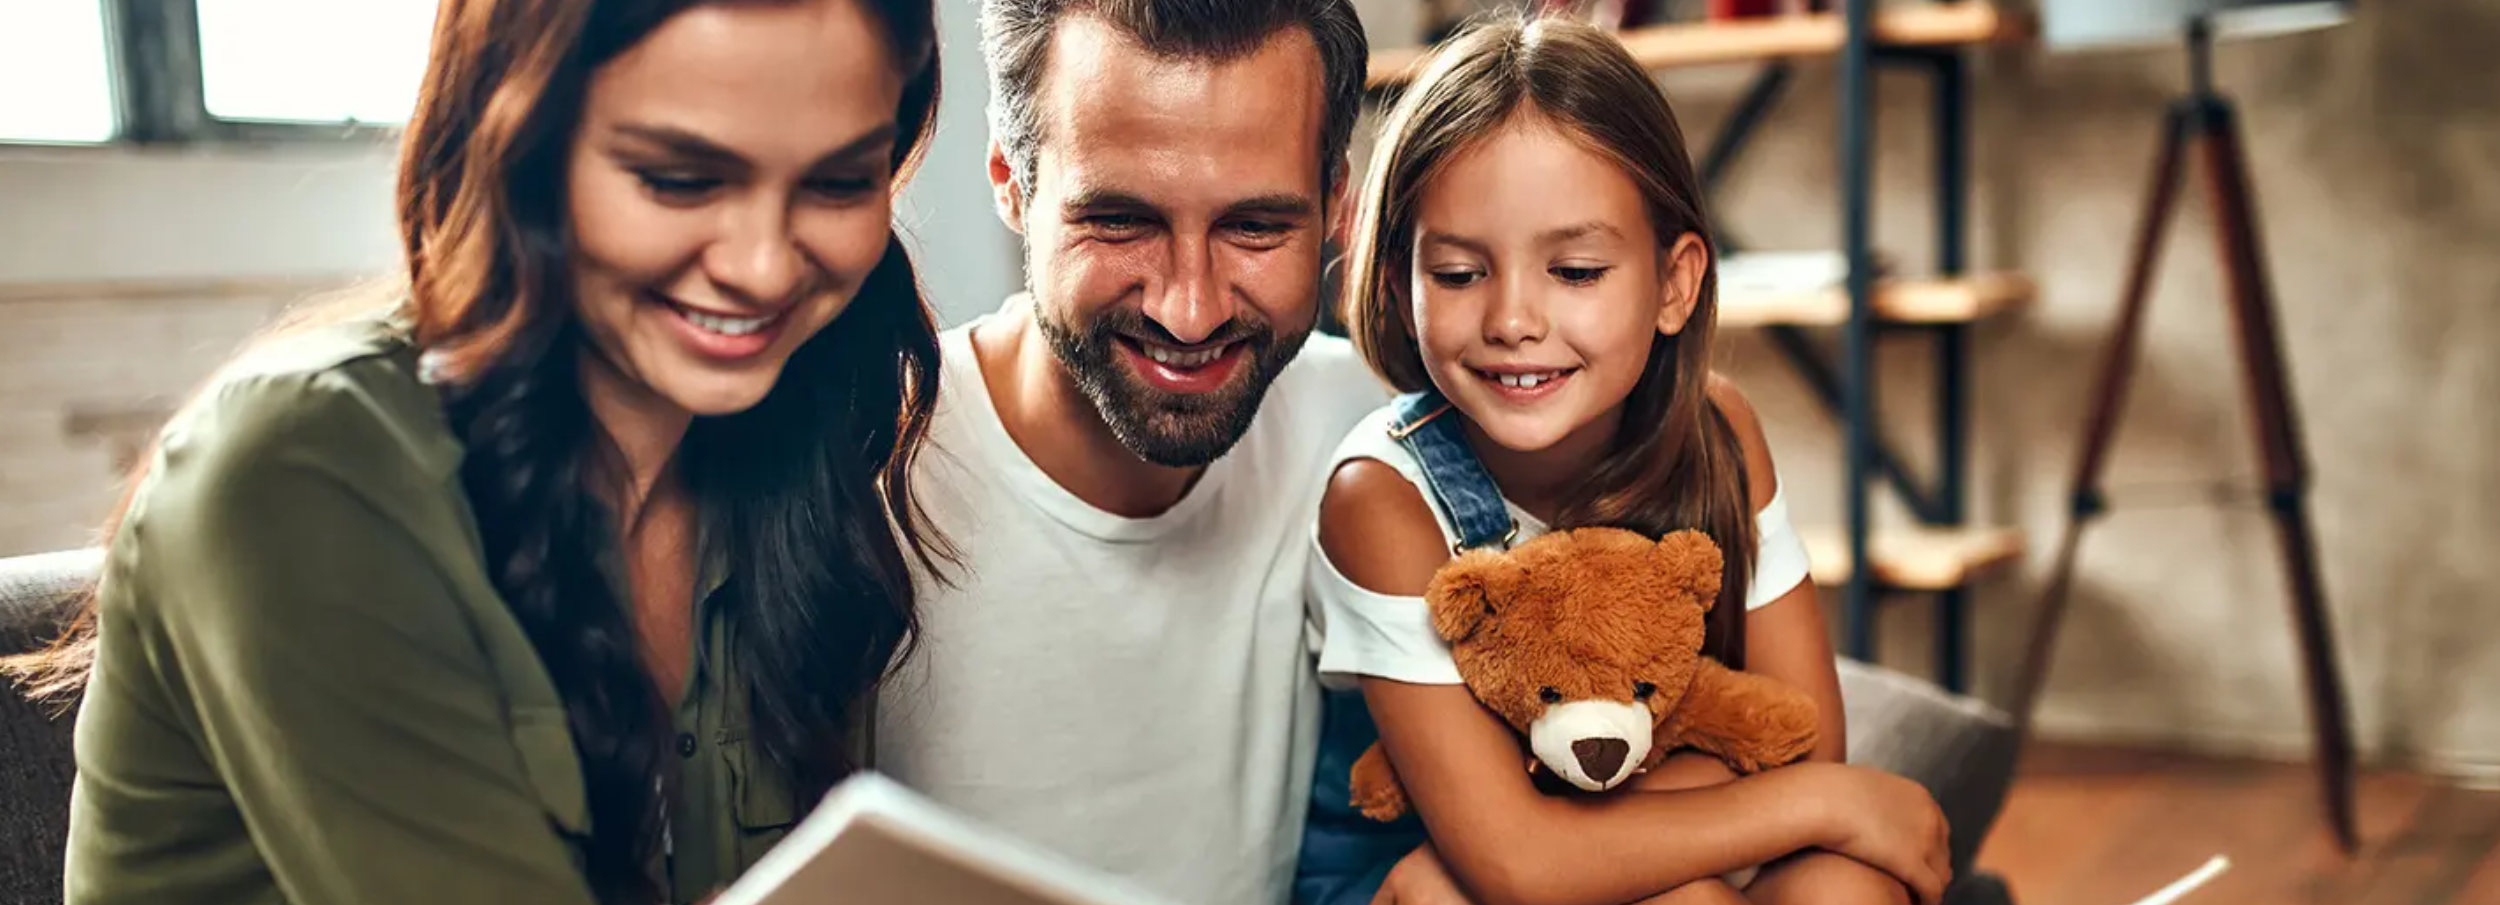 Smiling couple sitting beside daughter holding teddy bear in bright living room interior.